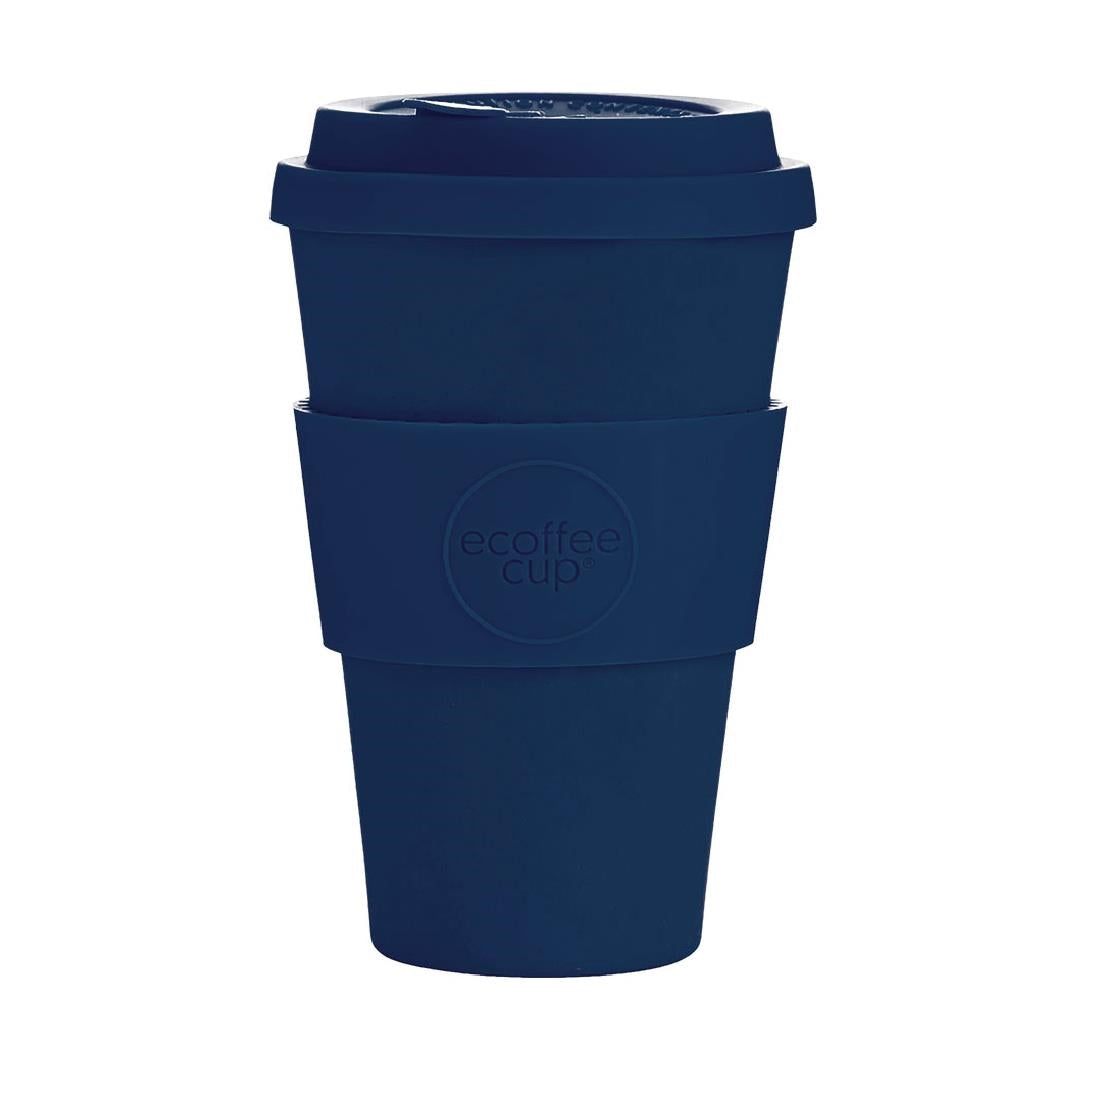 DY492 ecoffee Cup Reusable Coffee Cup Dark Energy Navy 14oz JD Catering Equipment Solutions Ltd